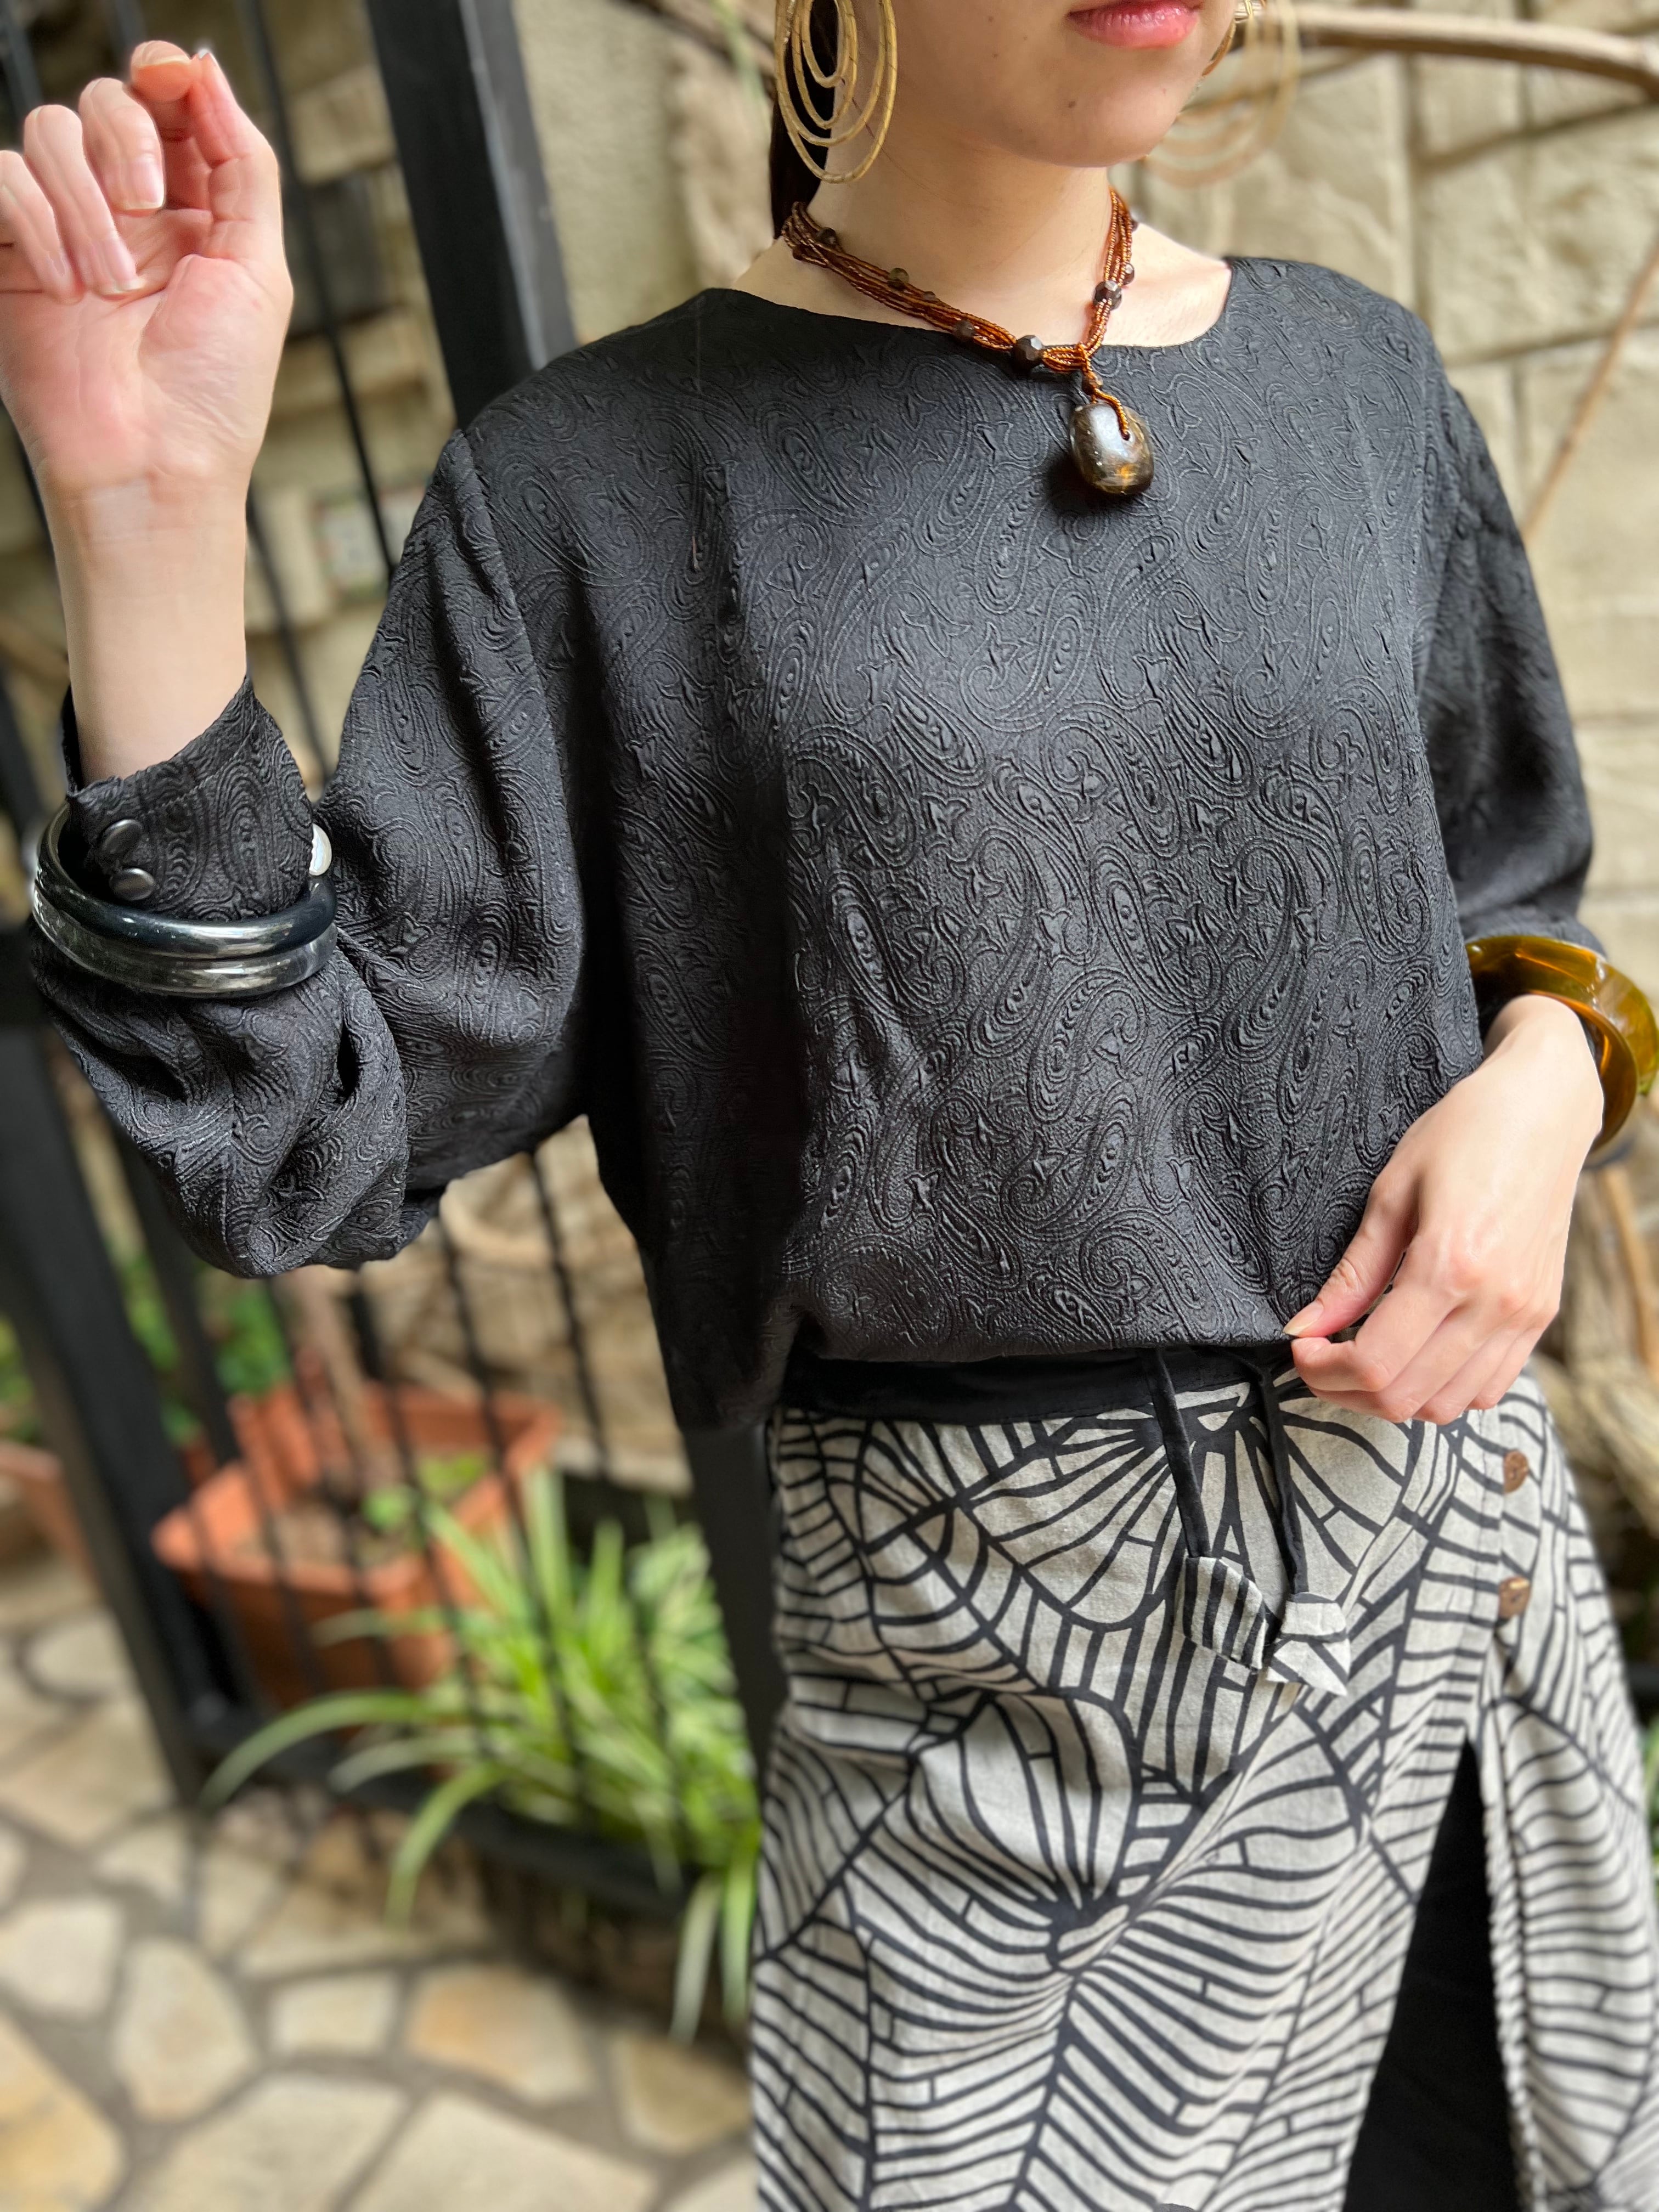 80s black × paisley simple poly tops ( ヴィンテージ ブラック × ペイズリー柄 シンプル ポリ トップス )